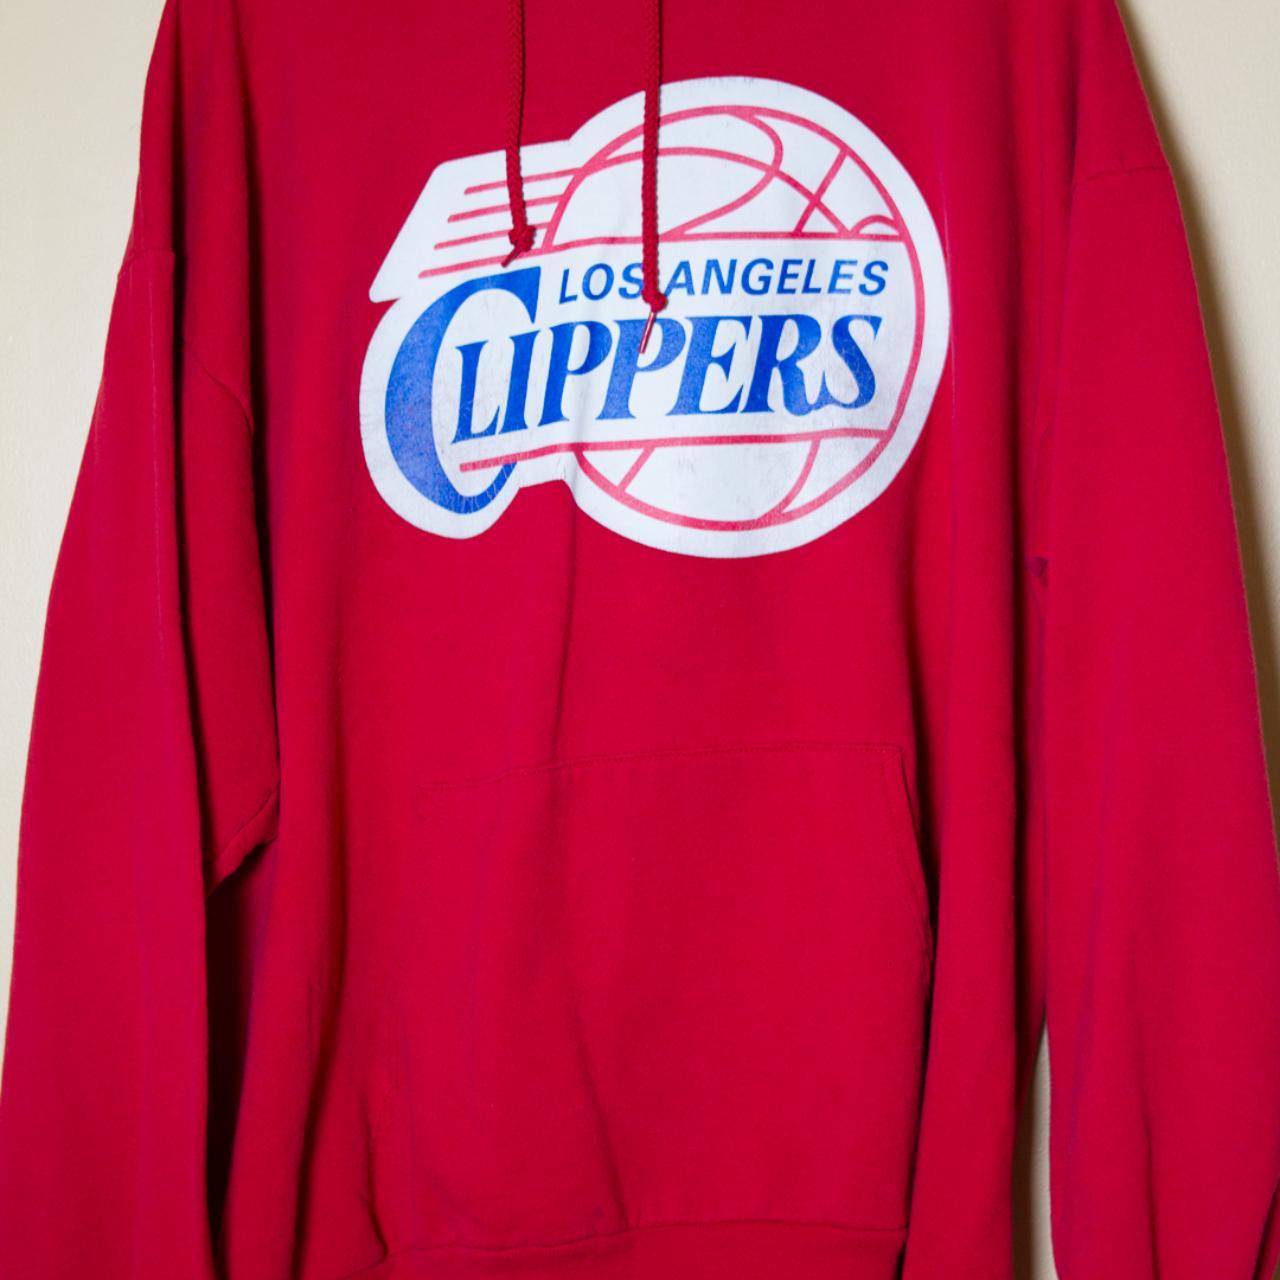 Los Angeles Clippers Junk Food NBA Red Hometown T-Shirt Men's